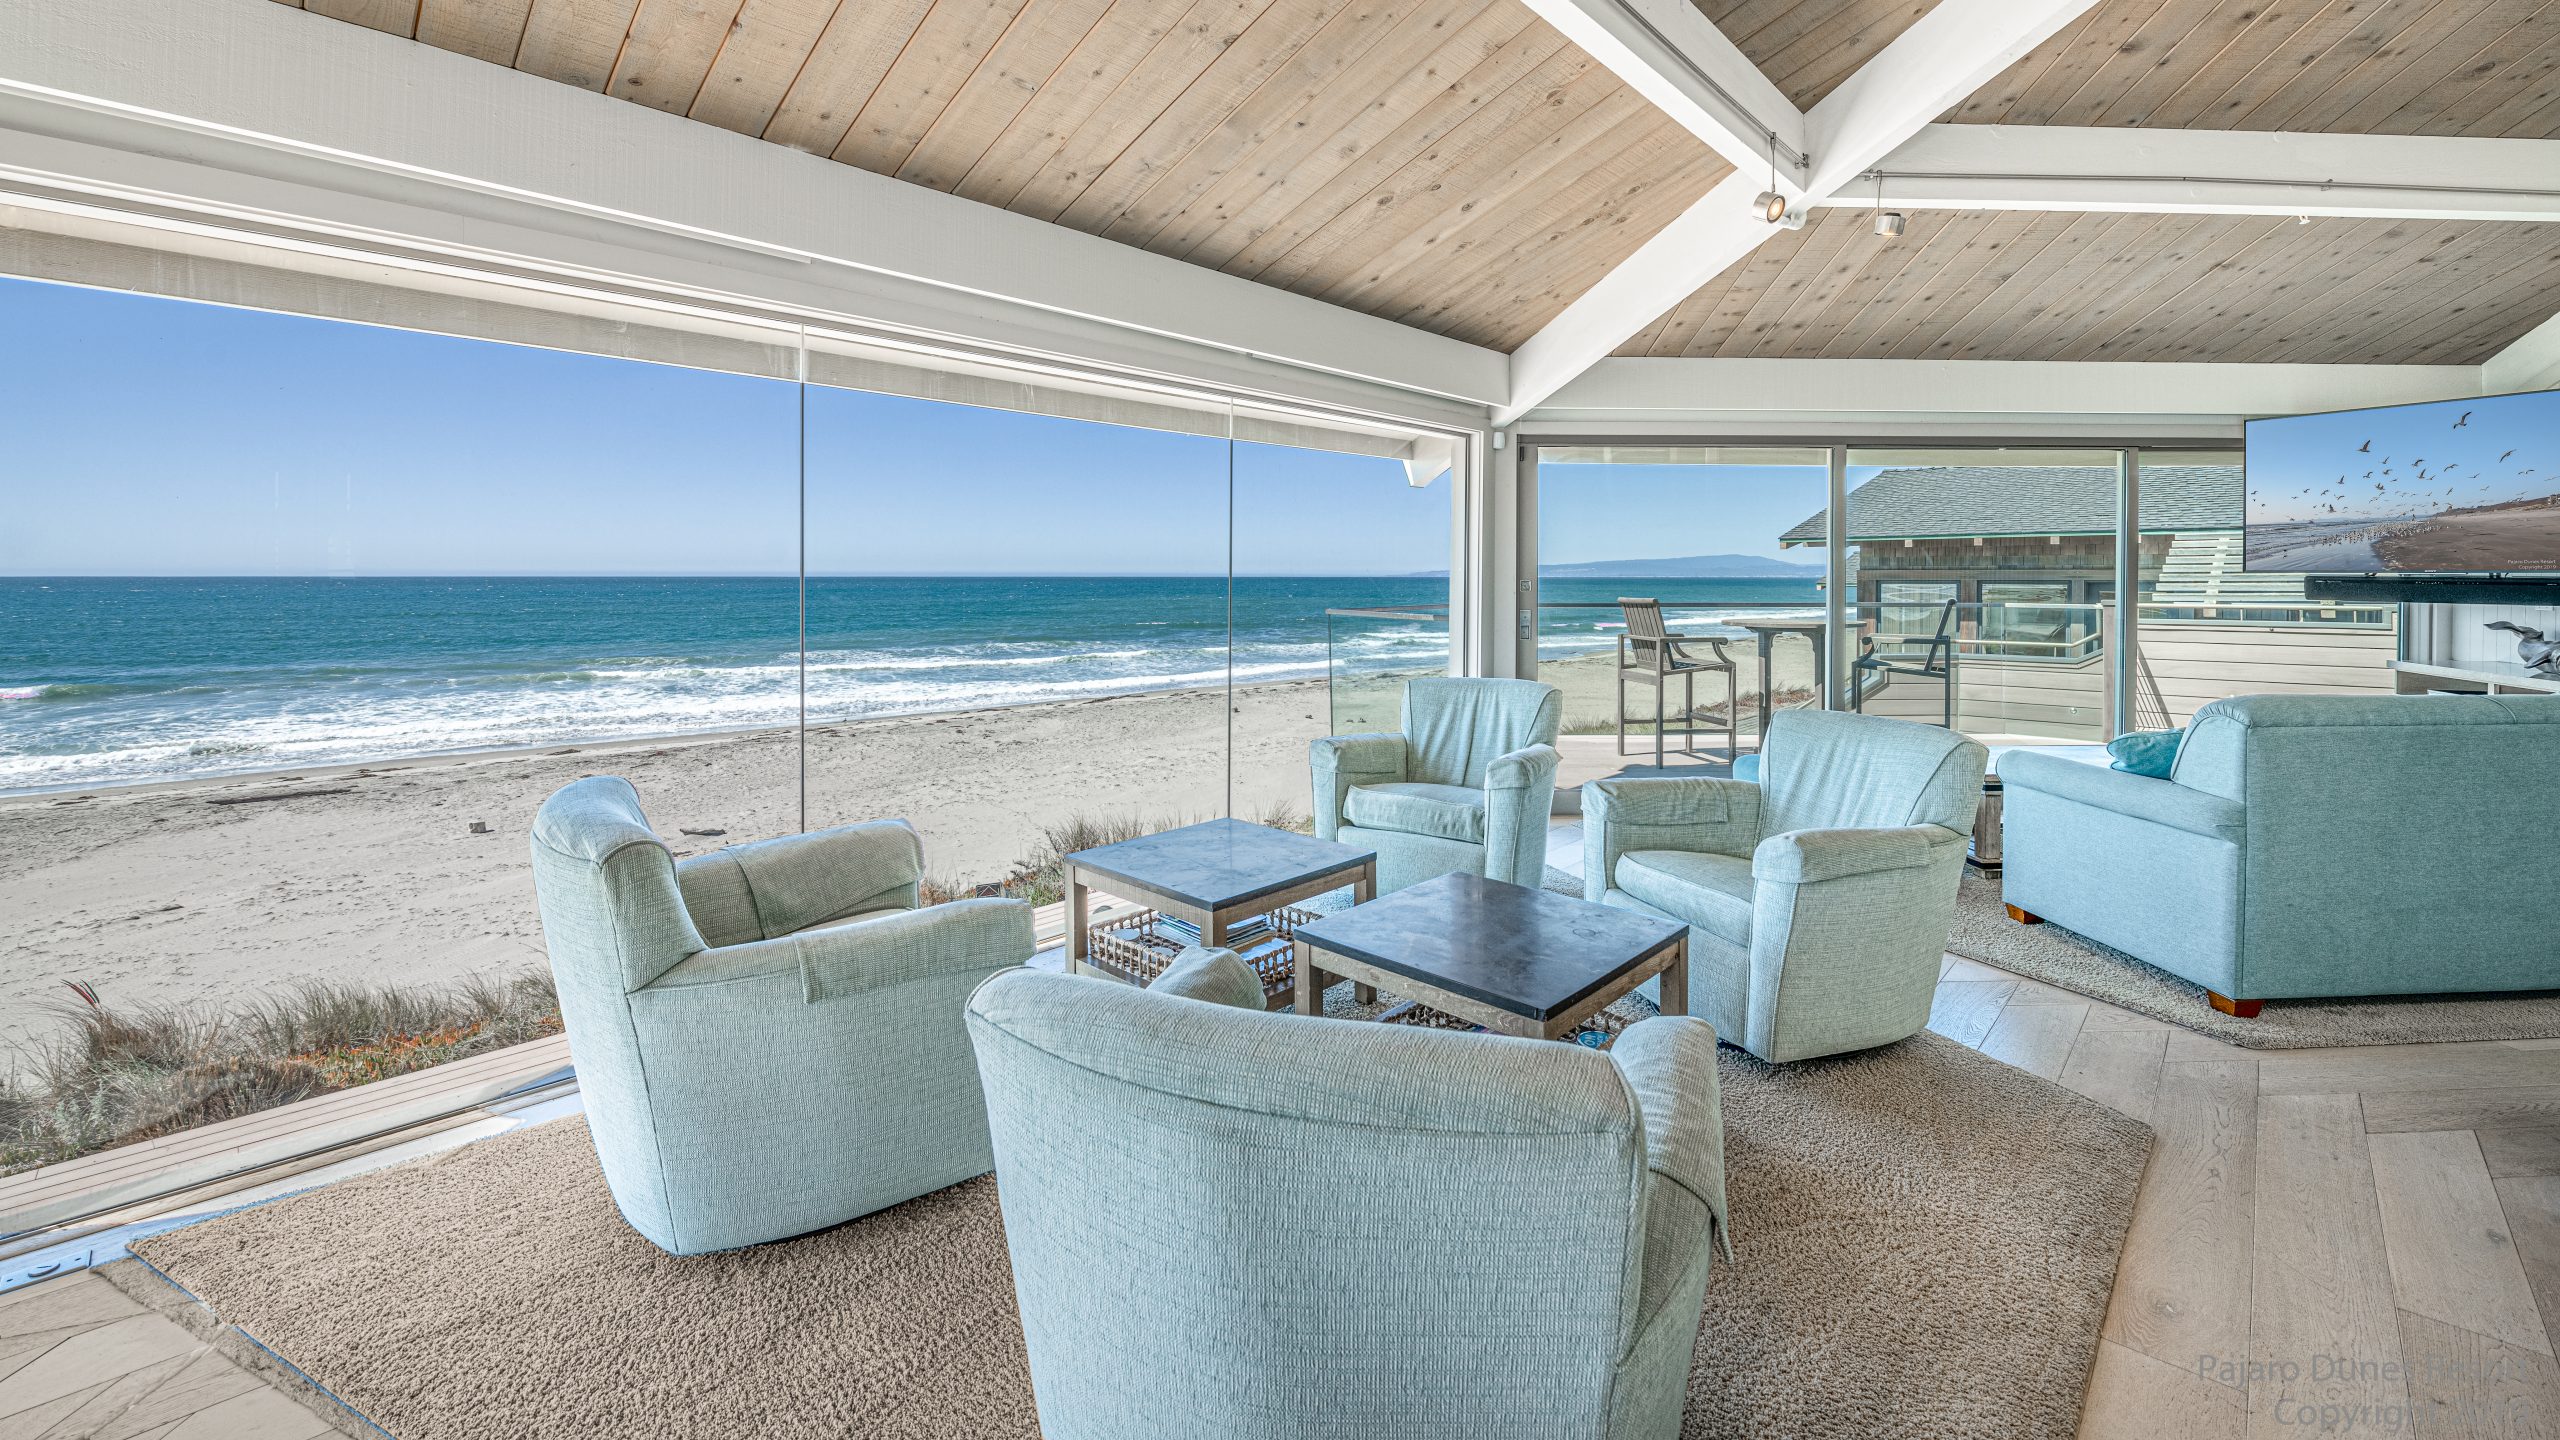 Remarkable deals for the beachfront vacation